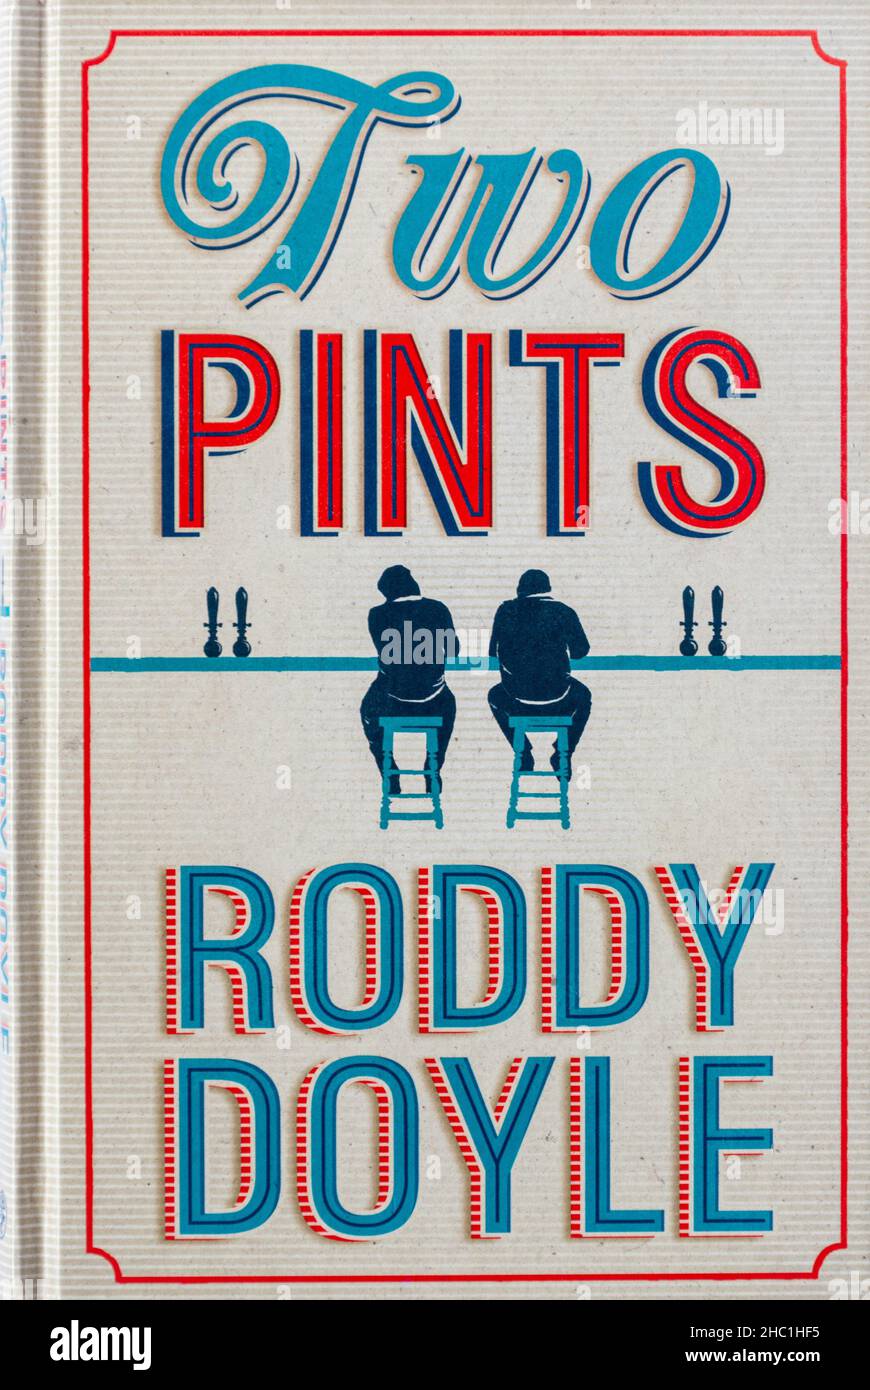 Two pints, a novel or book by Irish writer Roddy Doyle Stock Photo